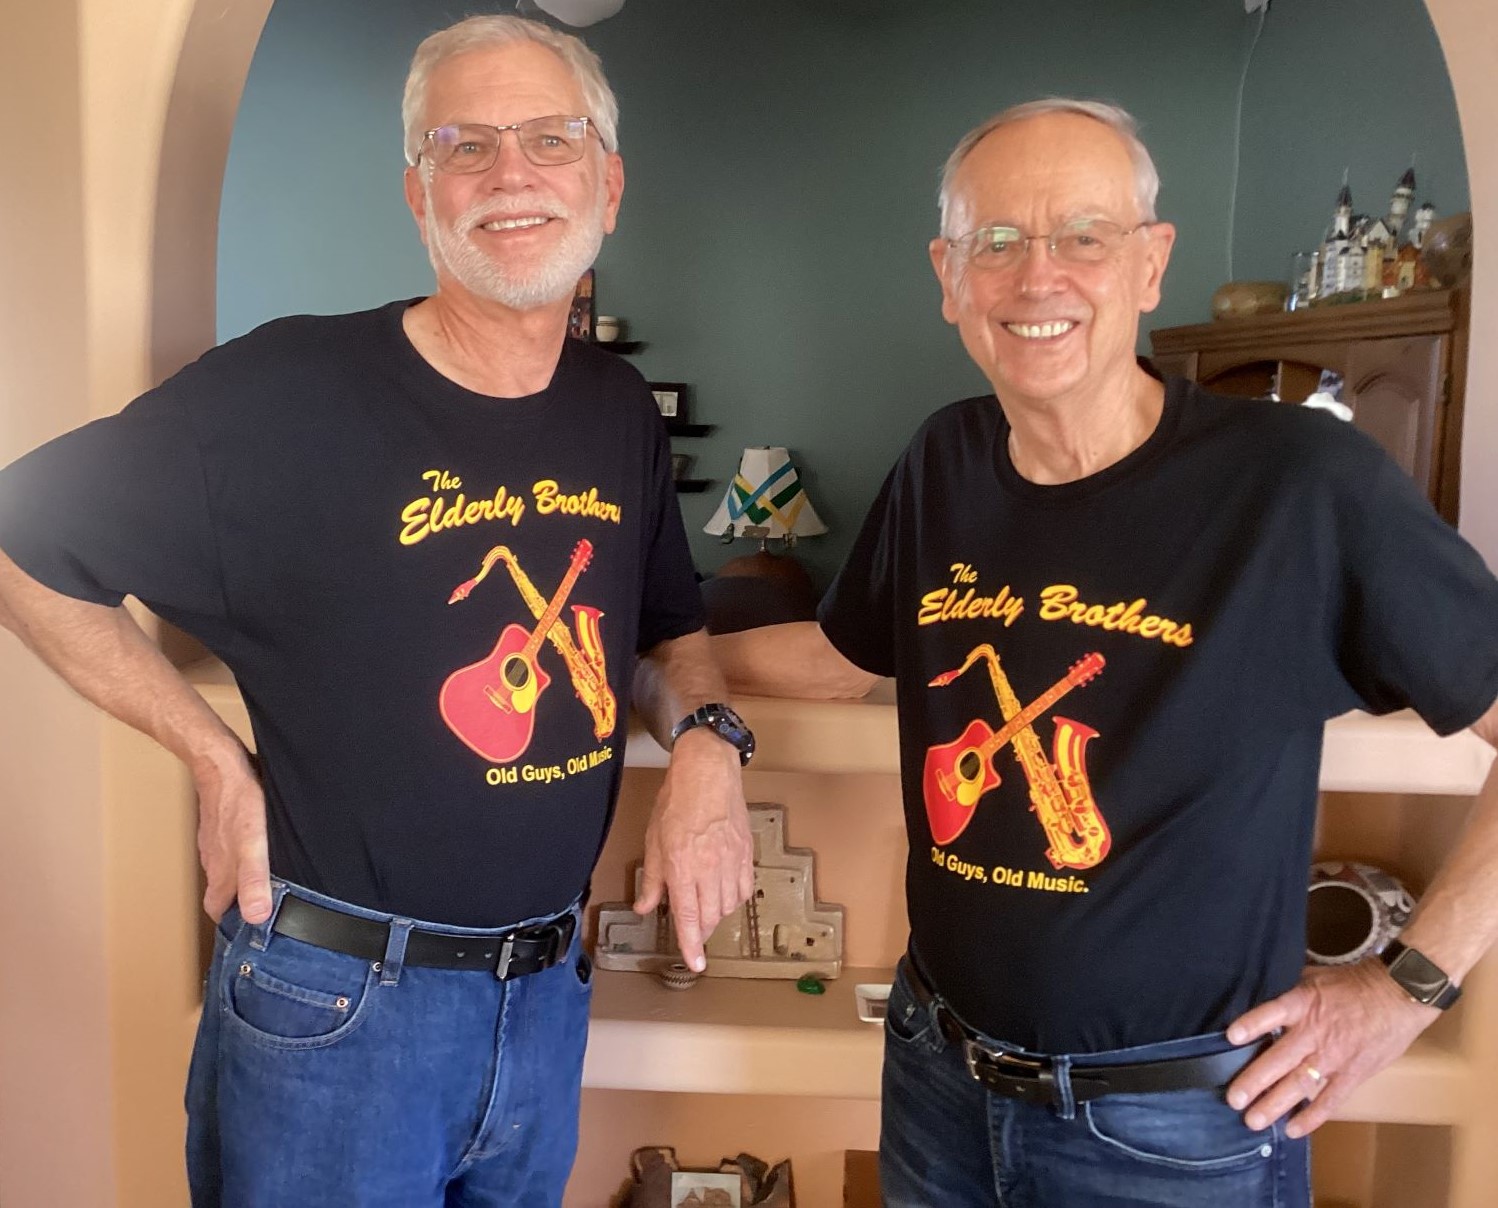 The Elderly Brothers duo sporting new t-shirts